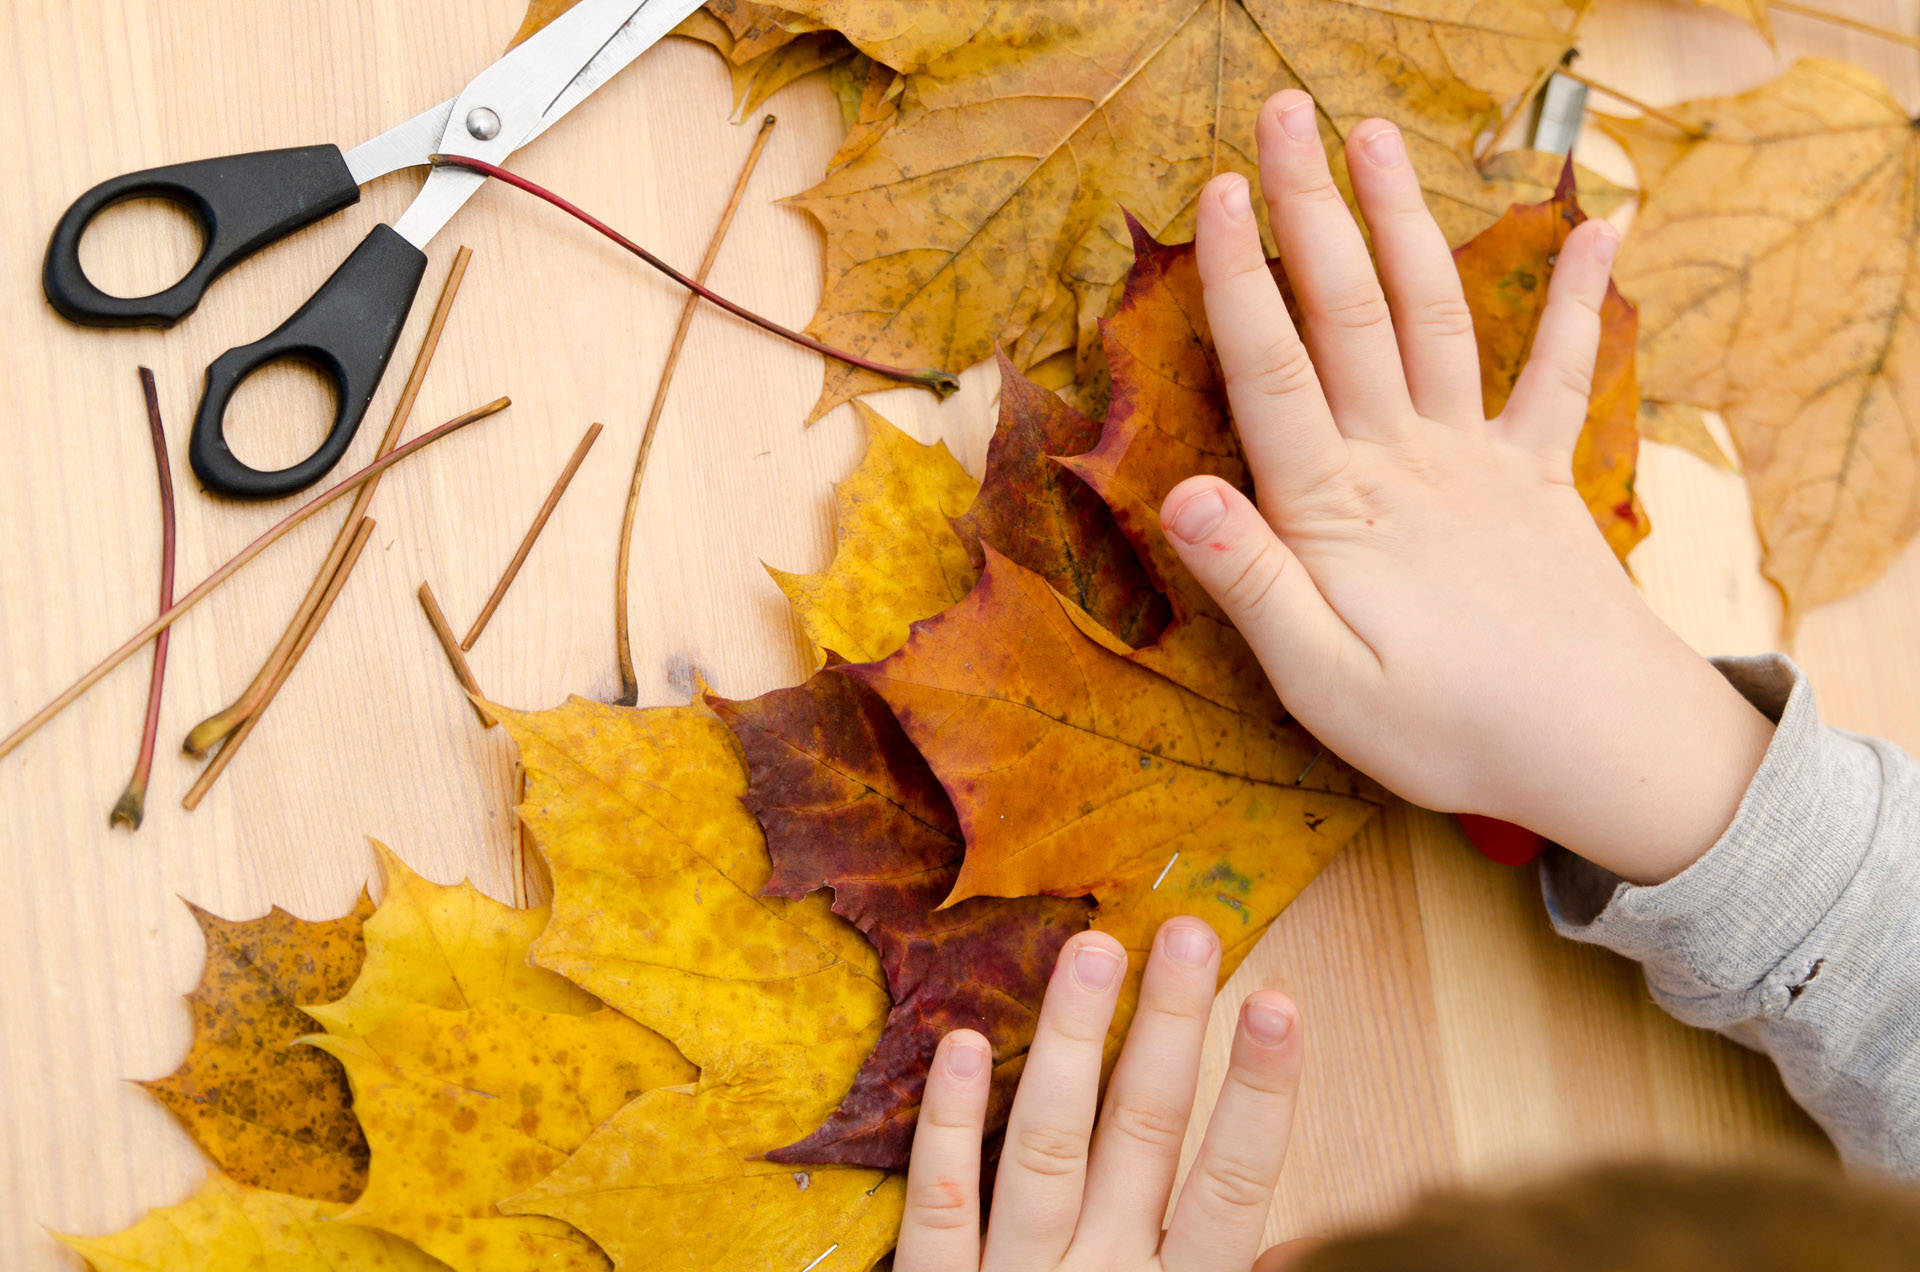 kid craft project with autumn leaves and scissors